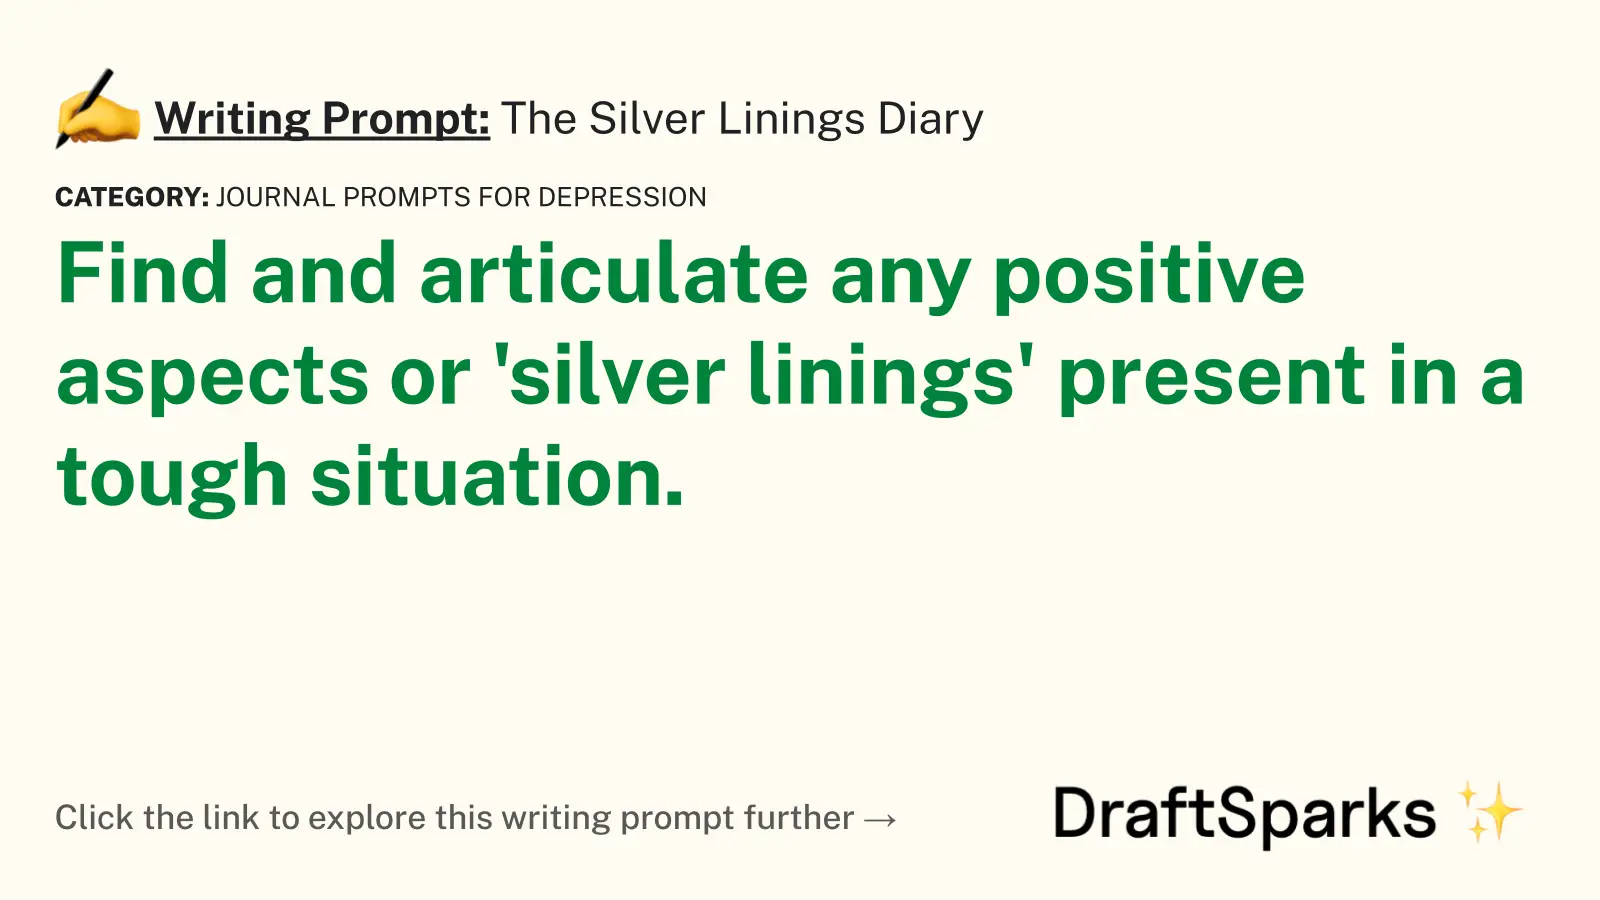 The Silver Linings Diary